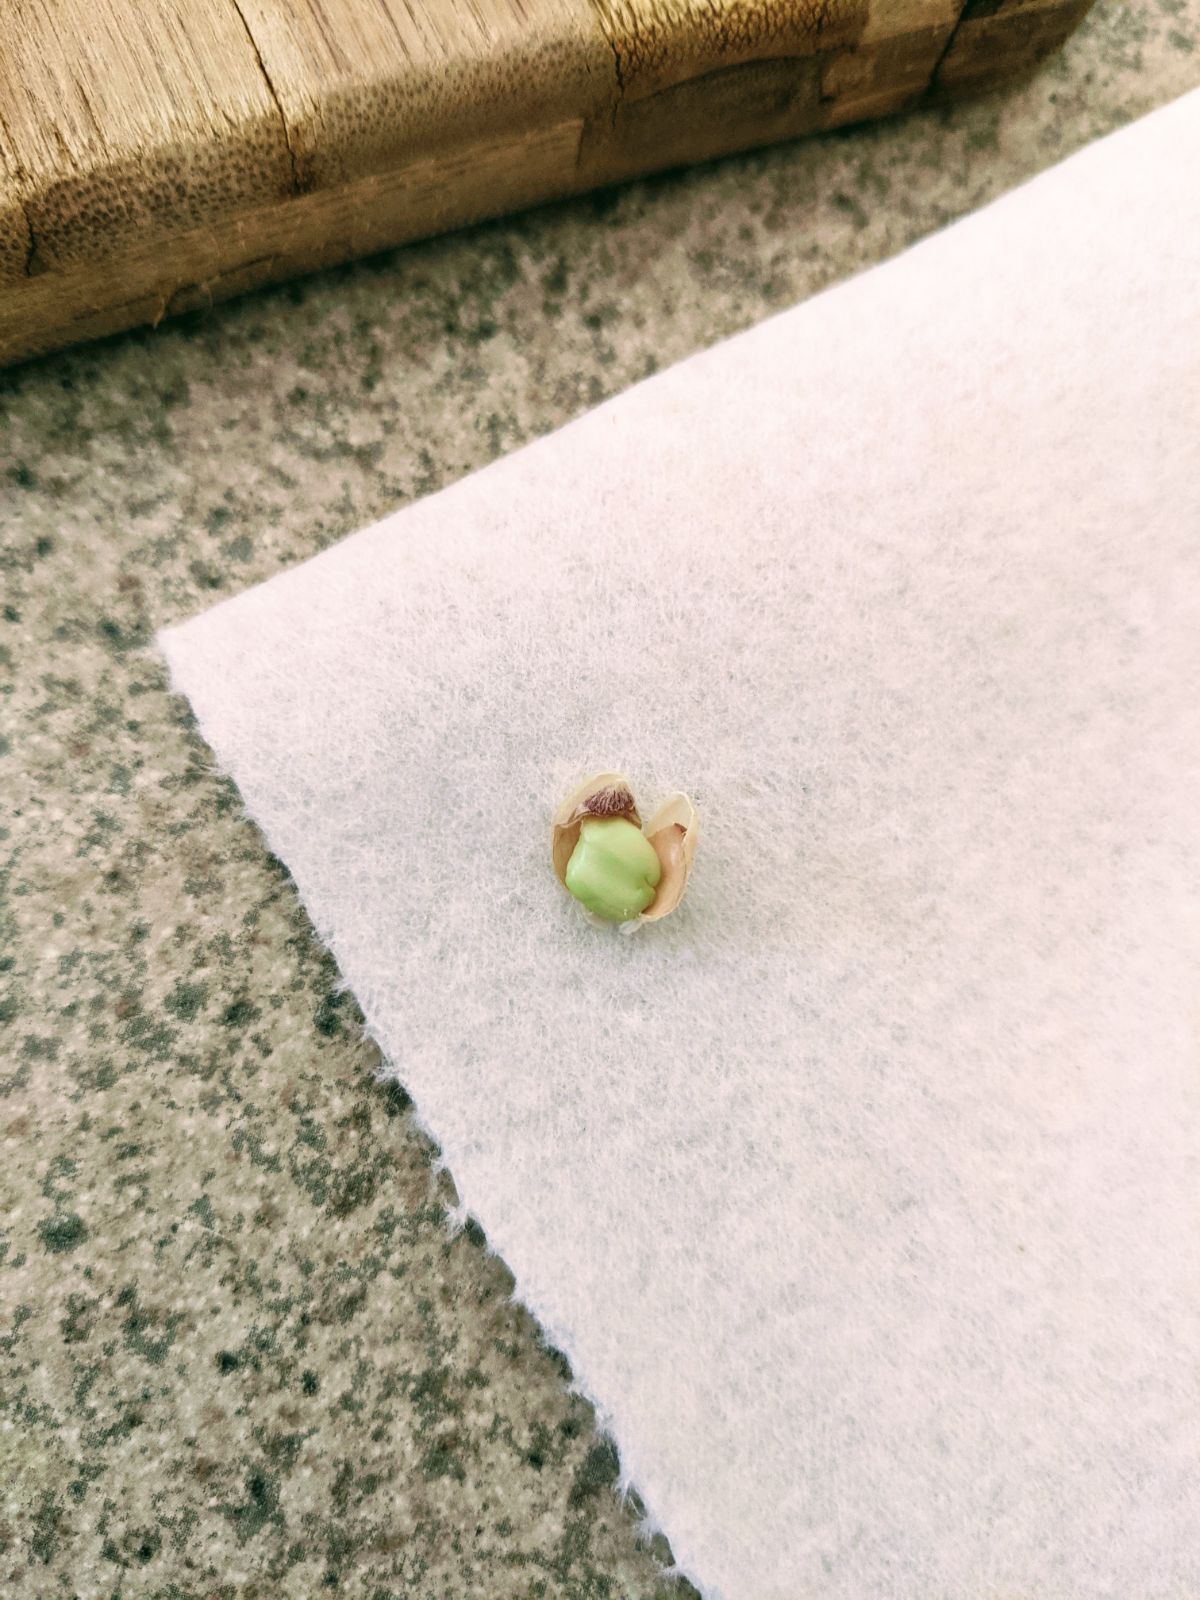 Key lime seed already sprouting